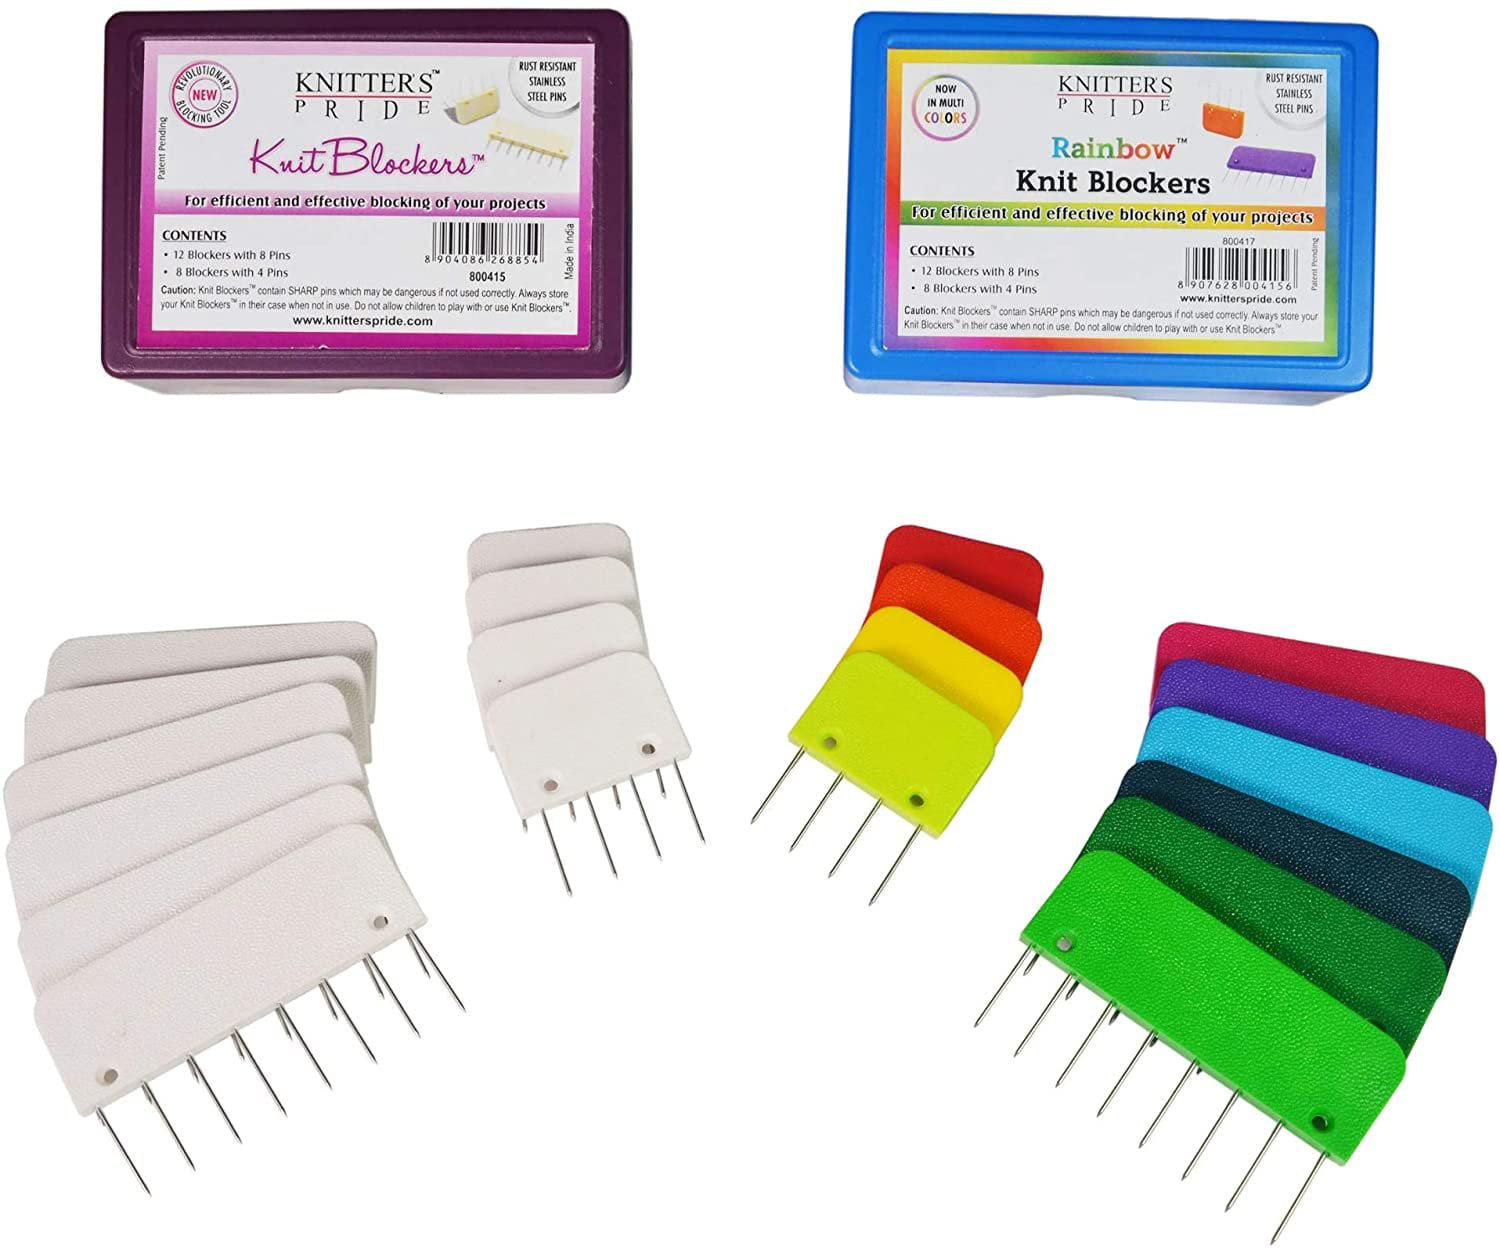 Knitters Pride - Rainbow Colored Knit Blockers